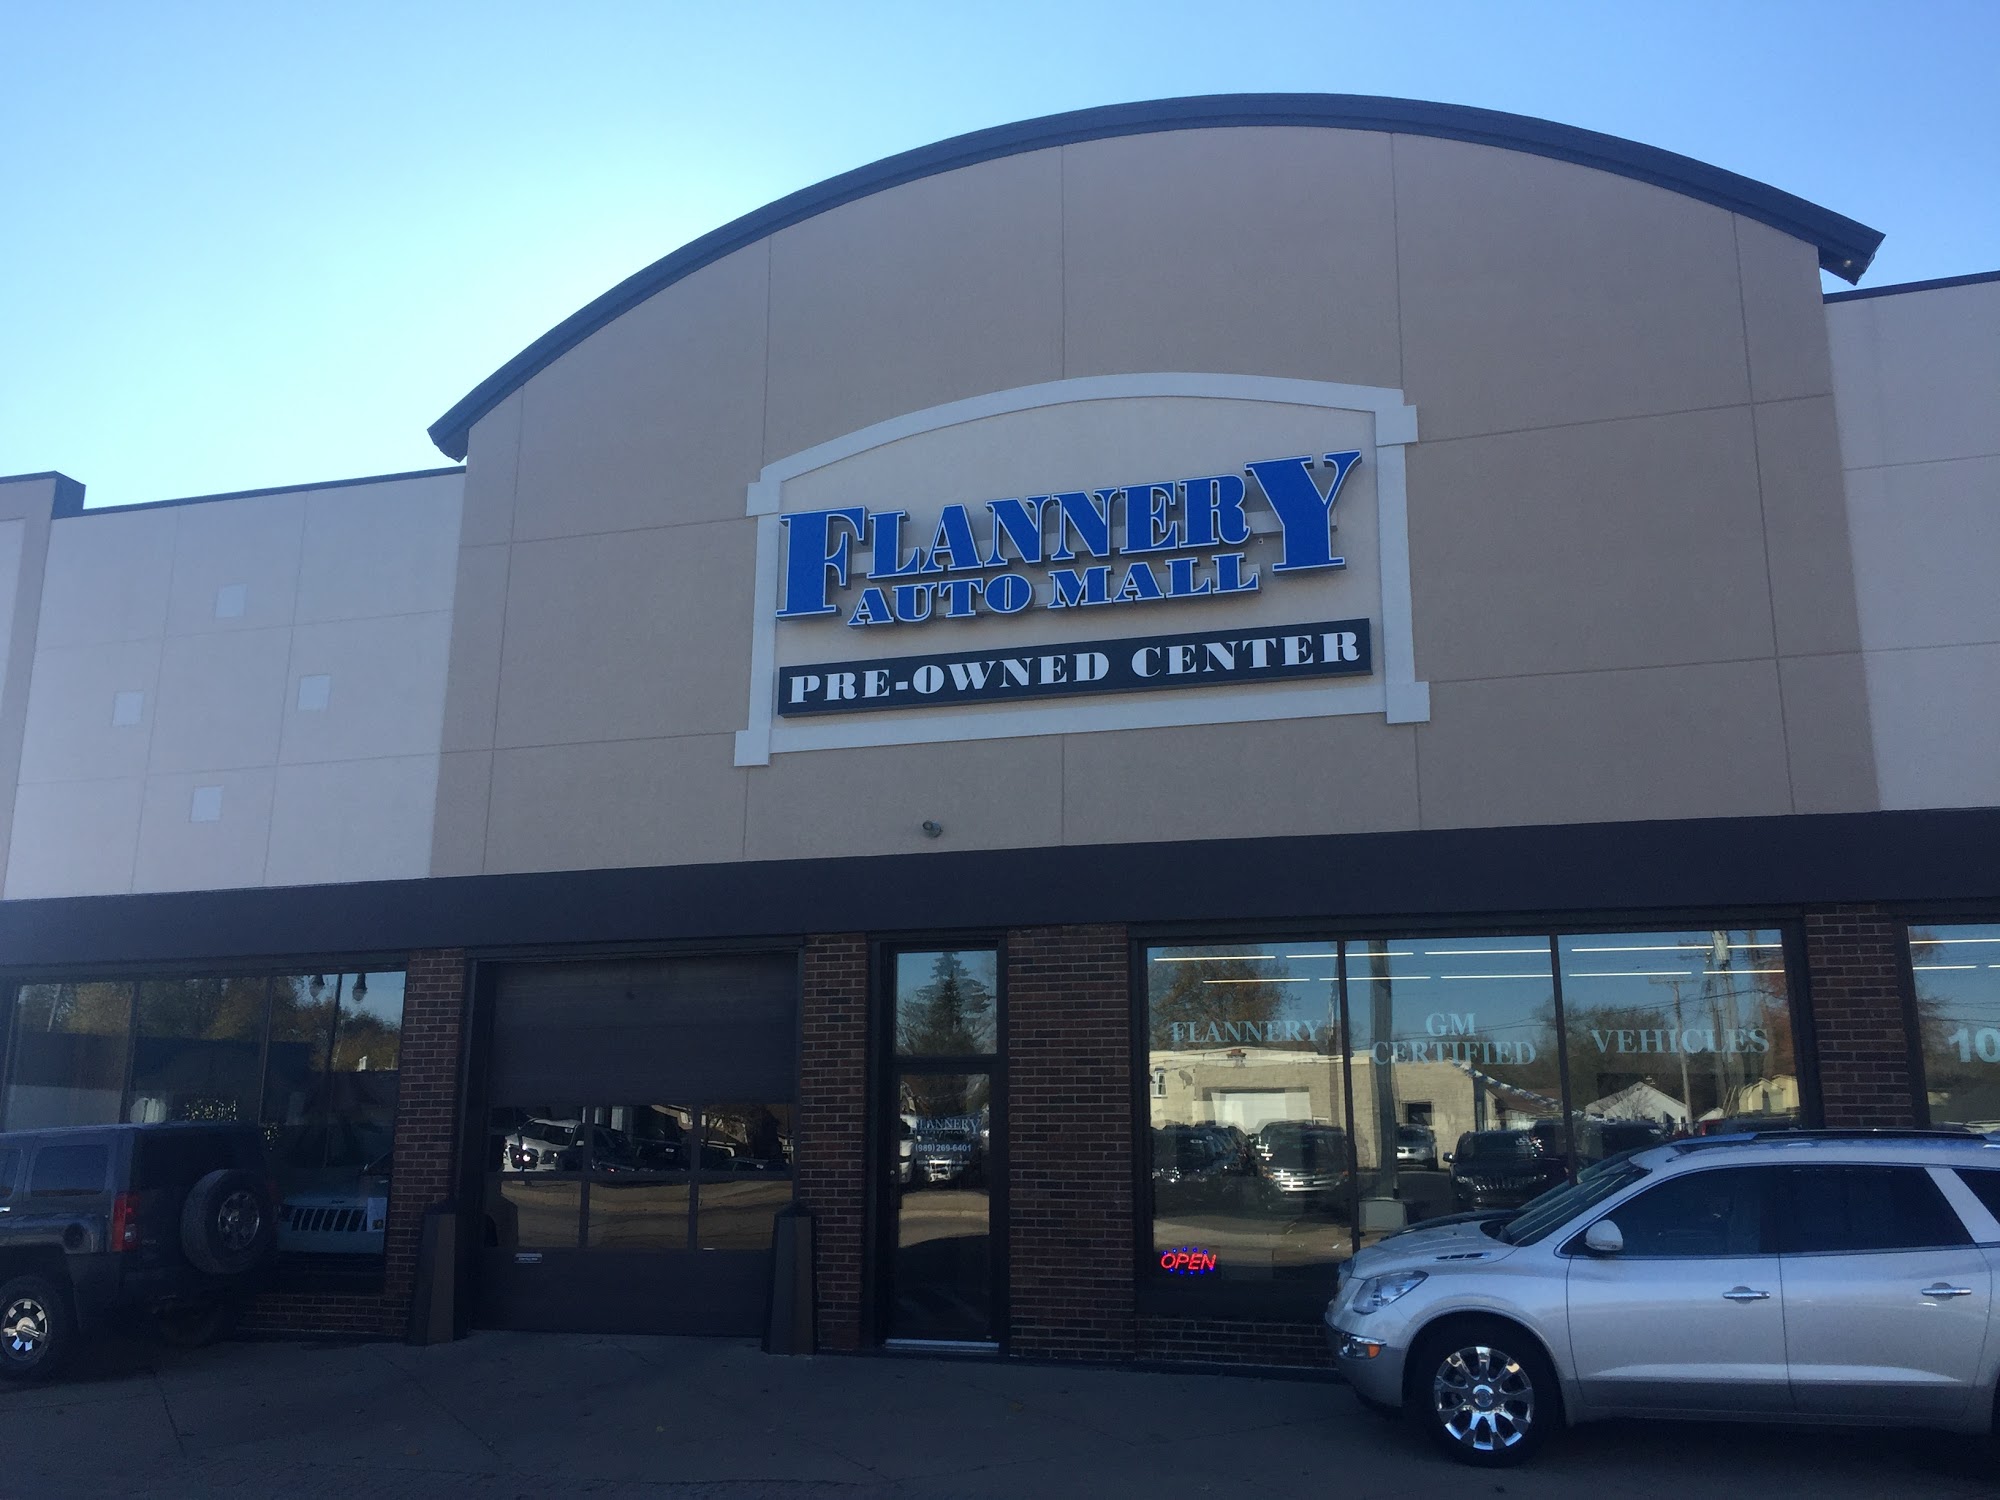 Flannery Gm Cert Used Cars